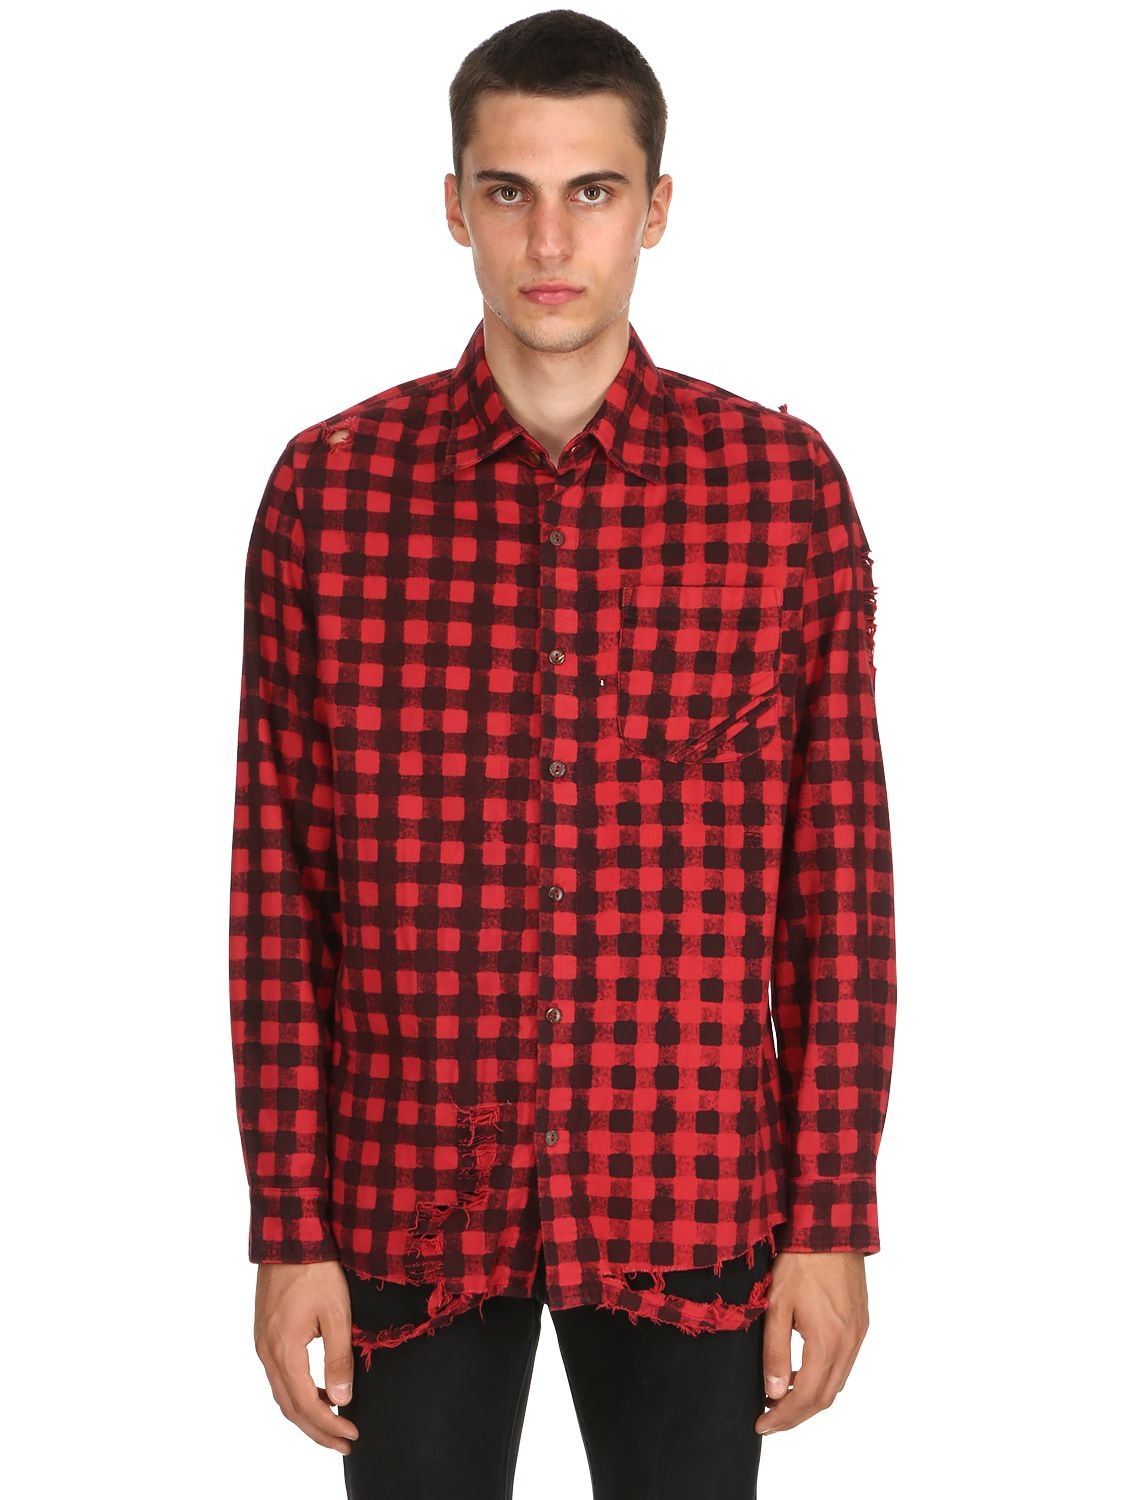 The People Vs Revolt Destroyed Plaid Flannel Shirt In Red